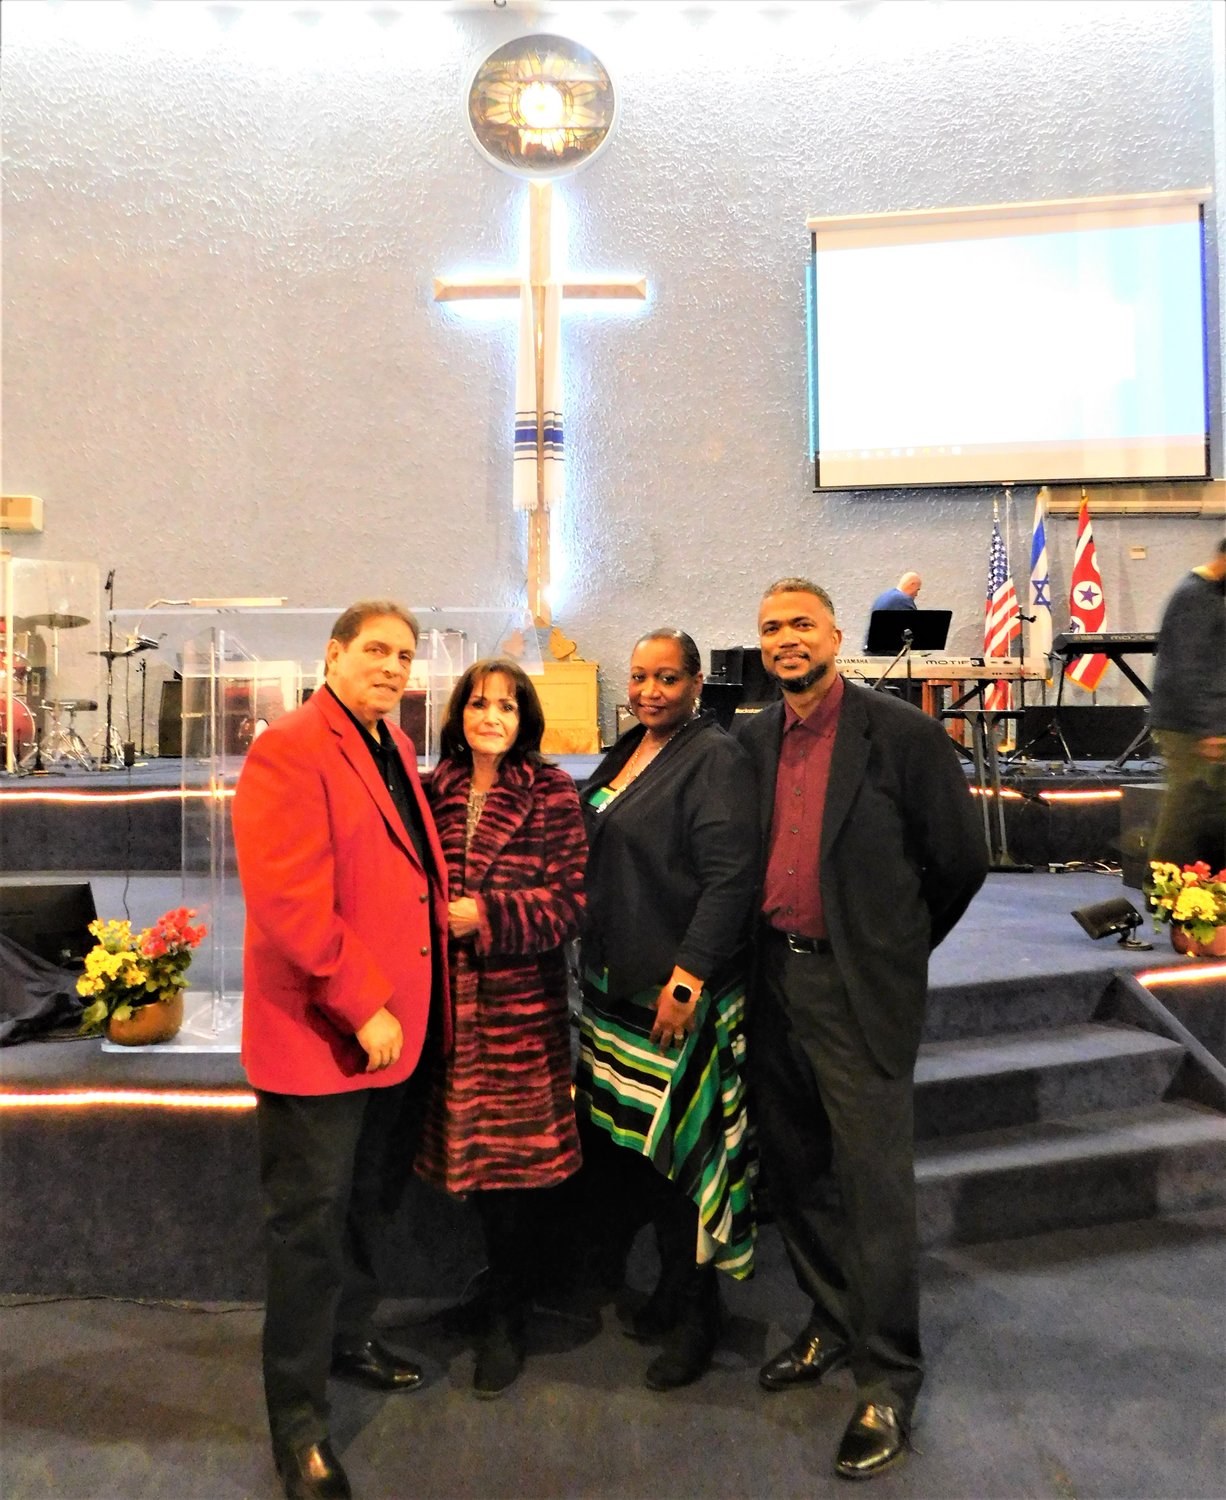 From left, Senior Pastor Gaspar Anastasi with wife Michele; Martine Saint Jean with husband and Lead Pastor Greg Saint Jean.